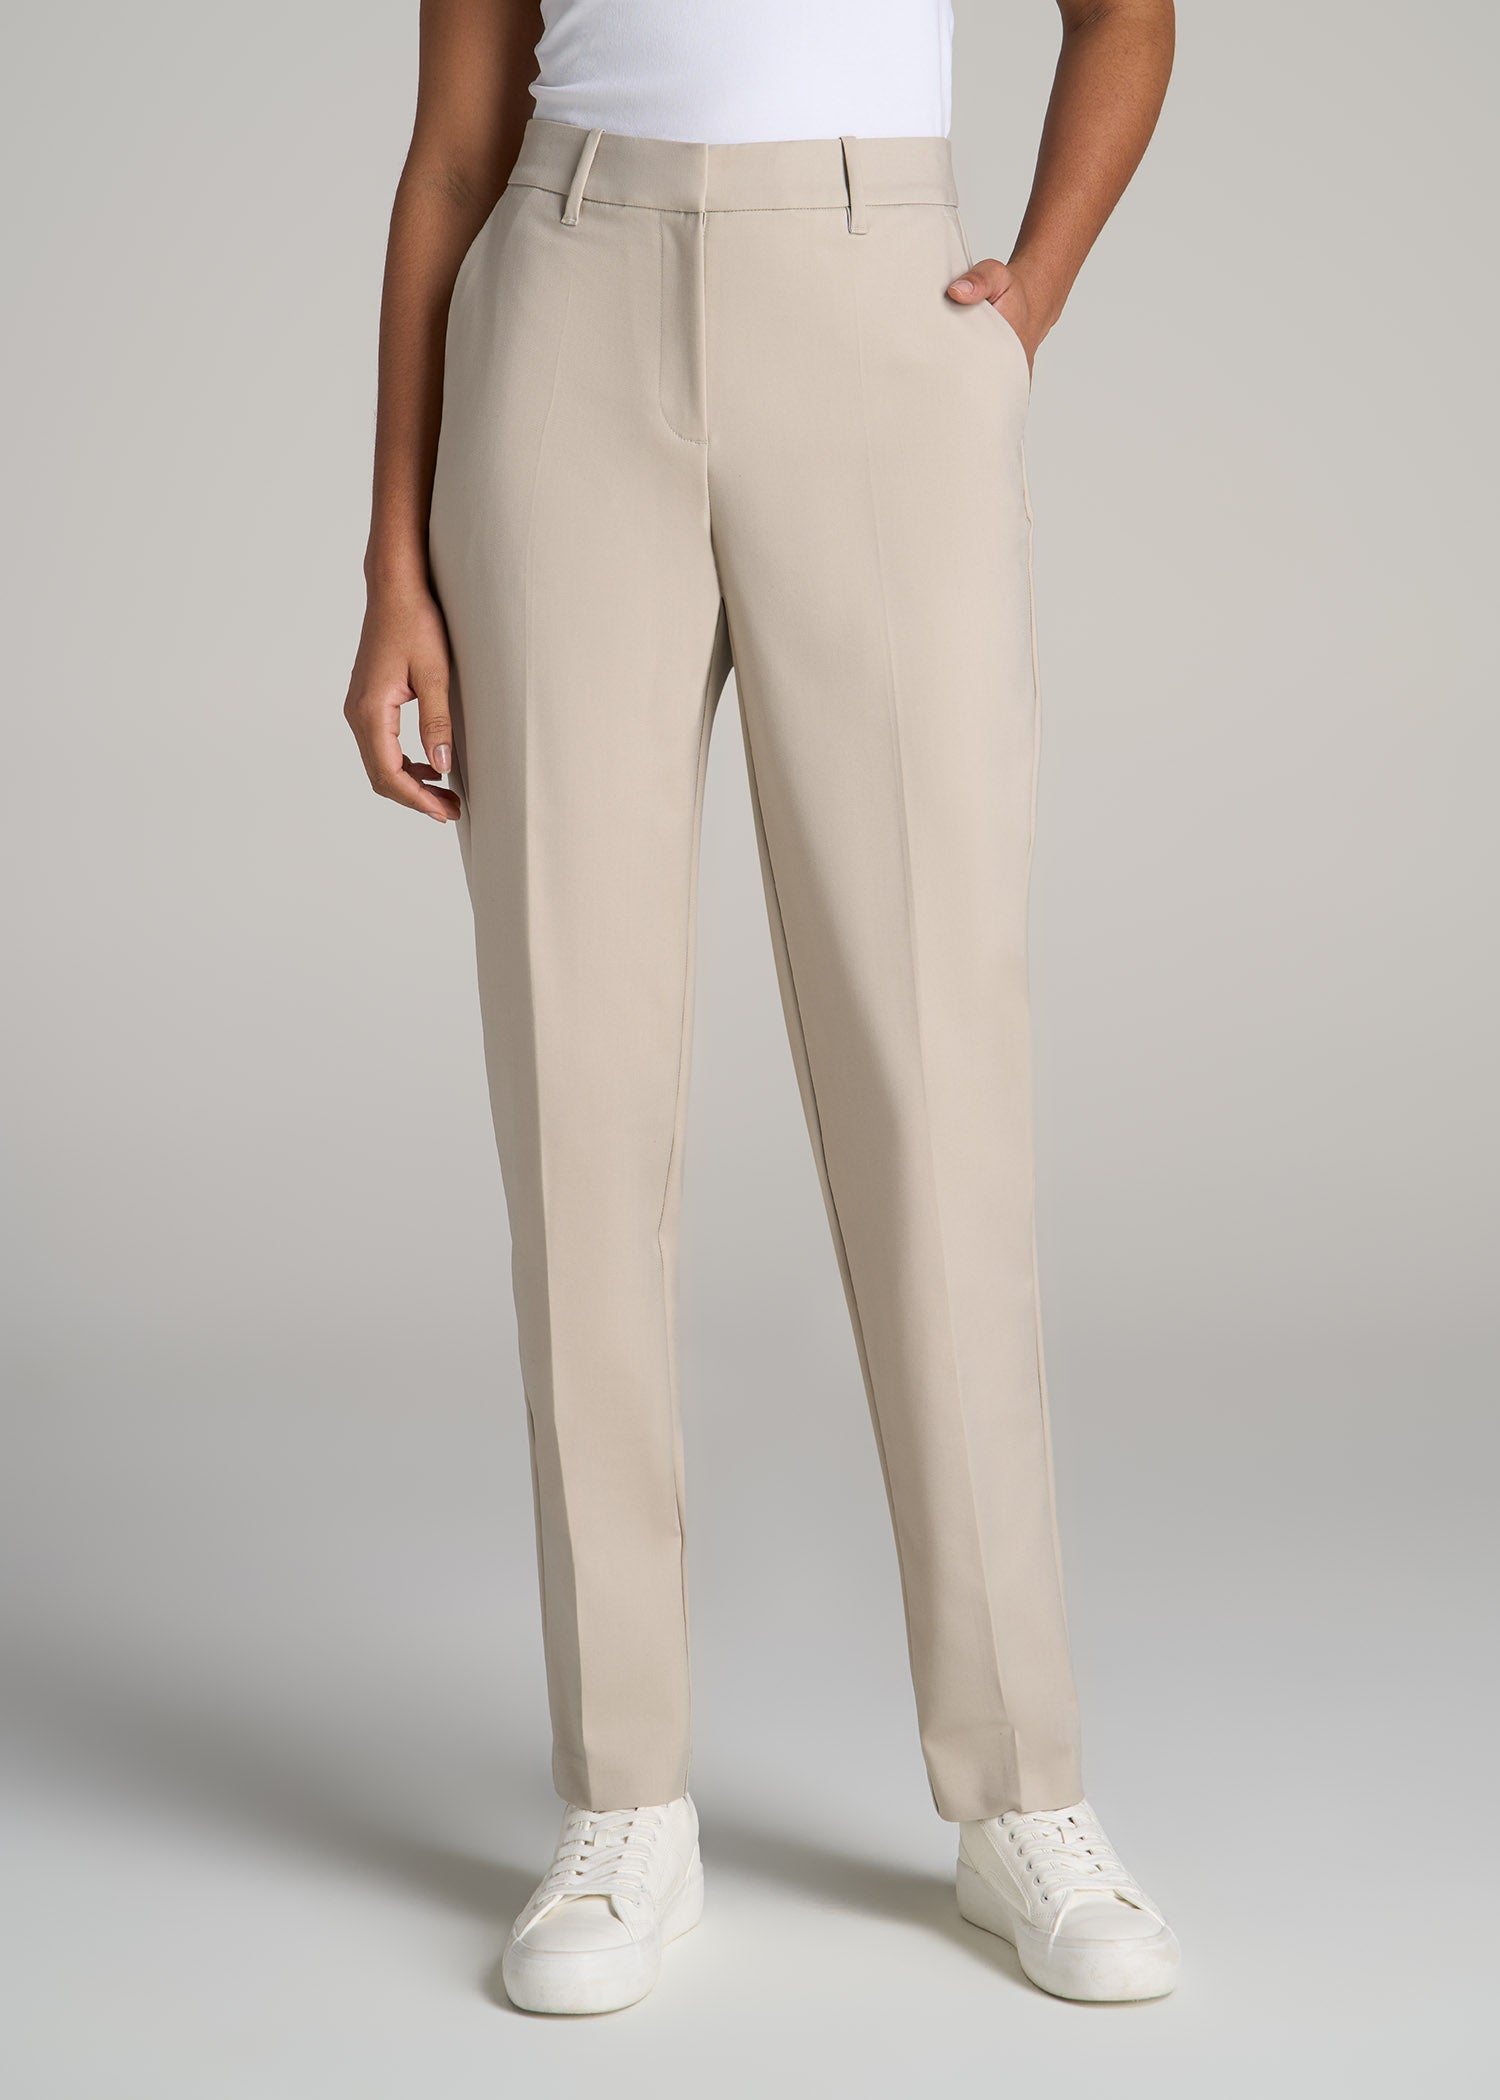 Flat Front Tapered Dress Pants for Tall Women